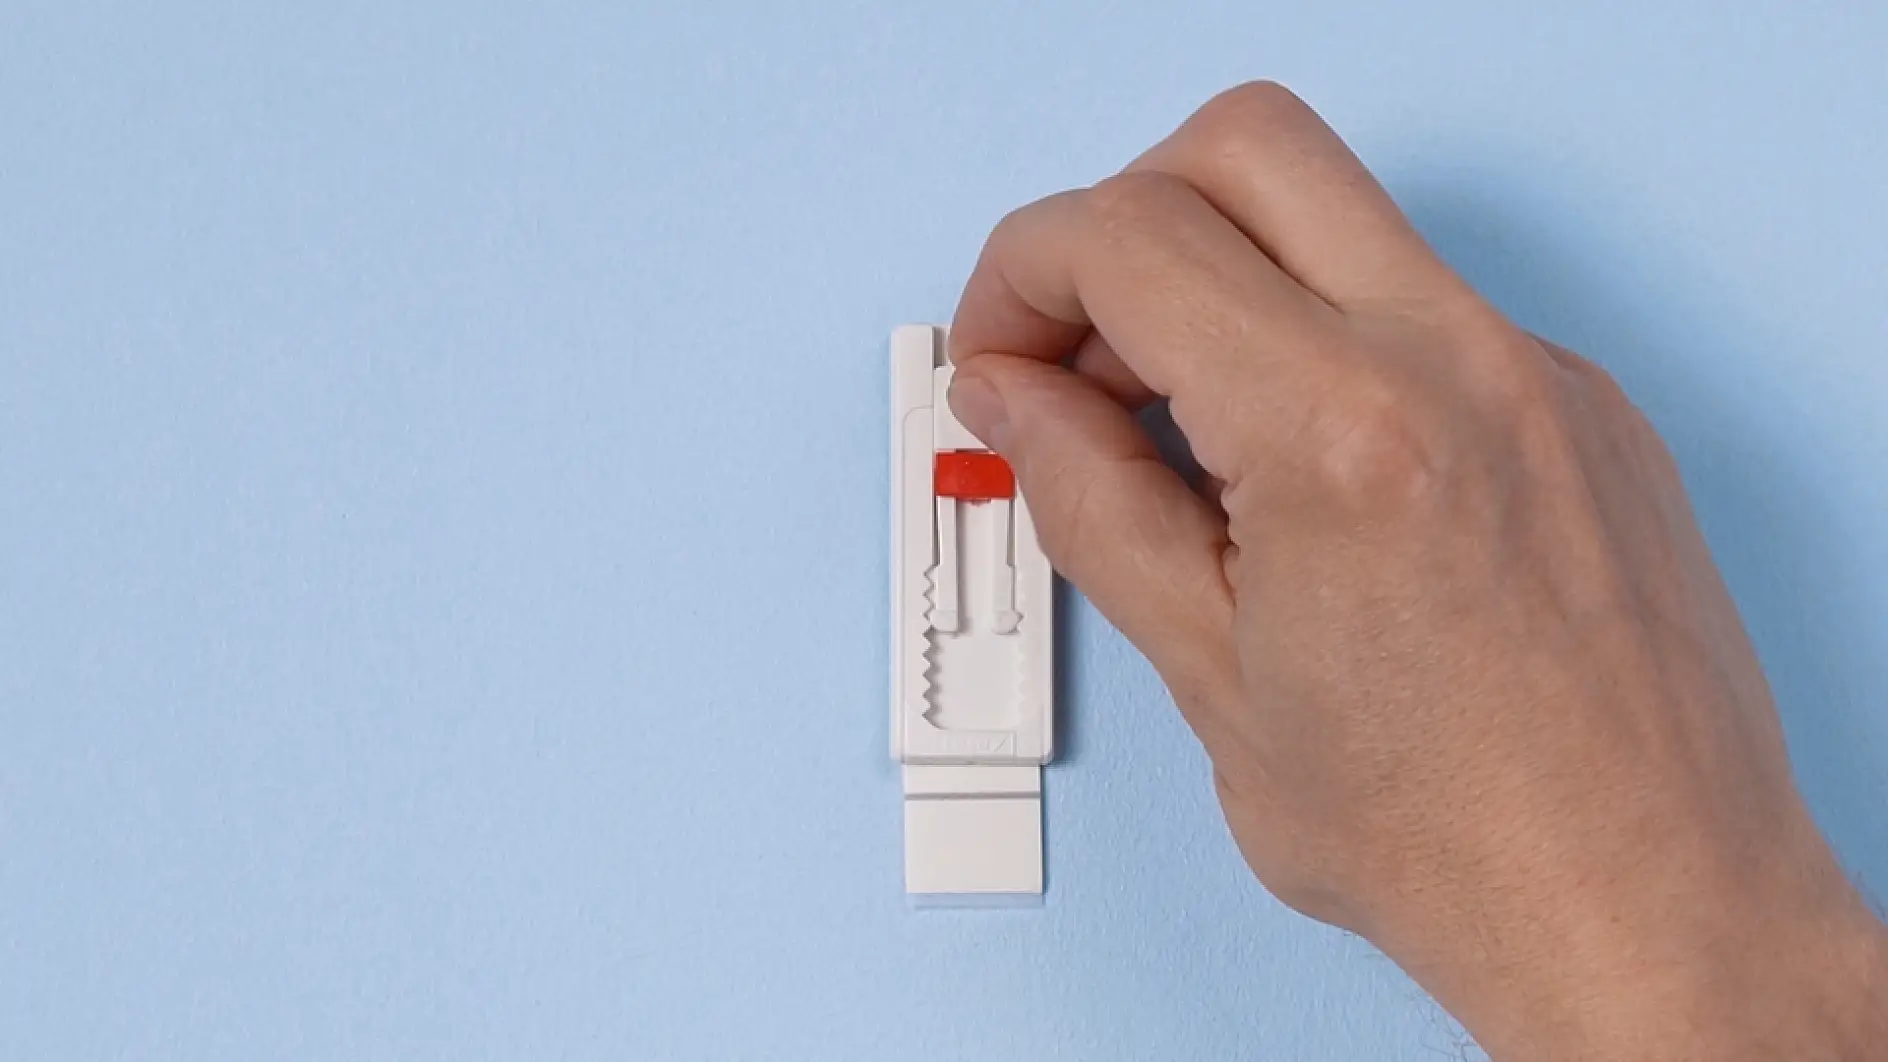 The Adjustable Adhesive Nail by tesa is mounted to the wall. A hand is adjusting the nail’s lever.